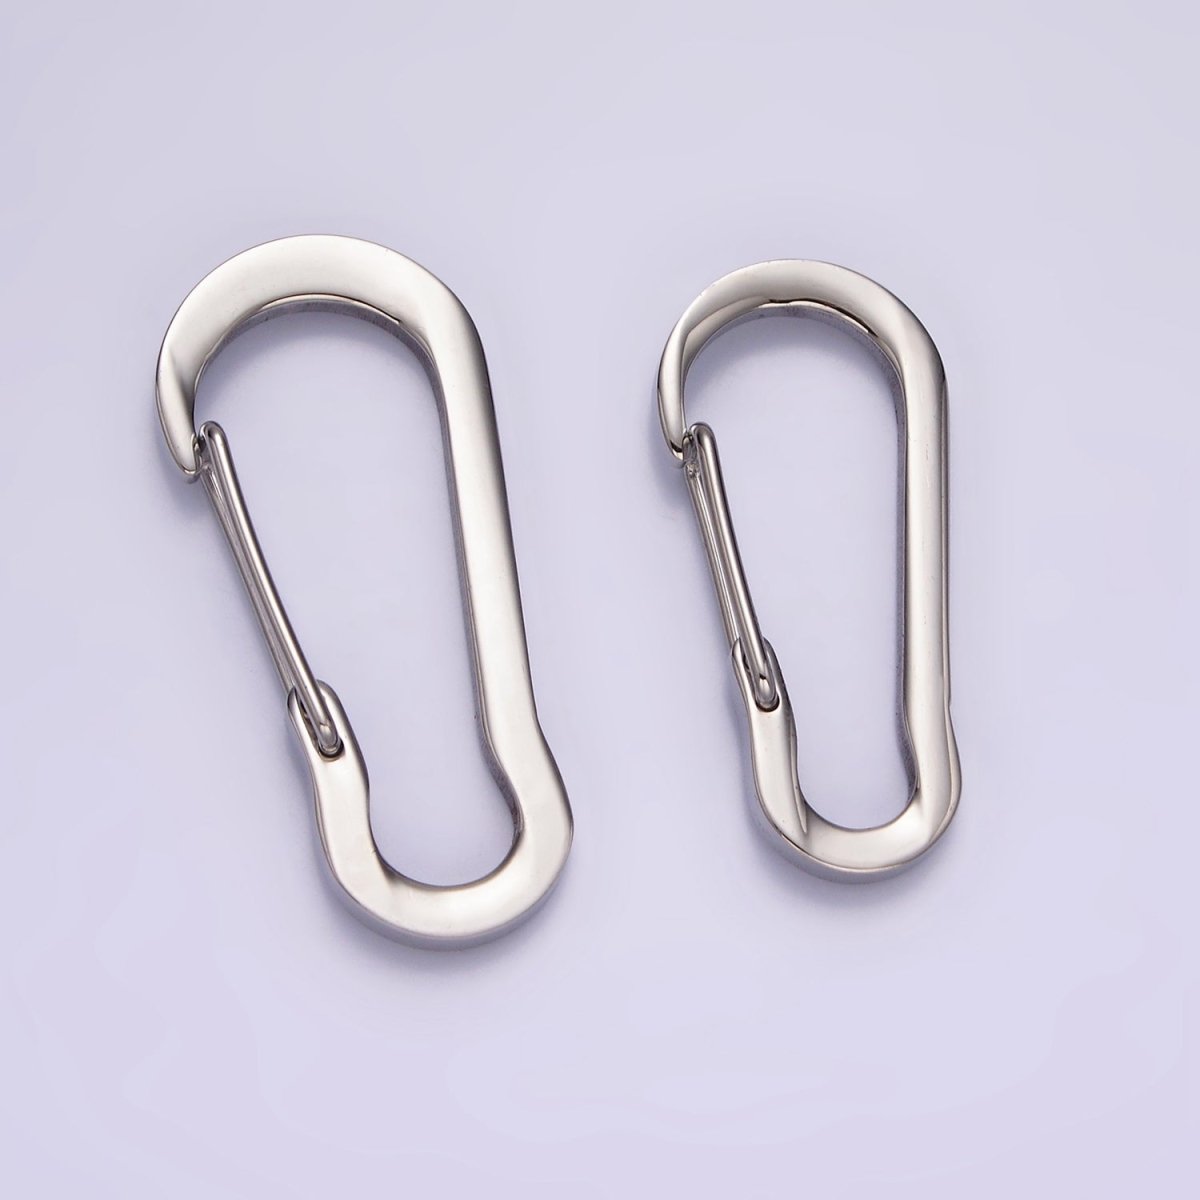 Stainless Steel 35mm, 30mm Curved Oblong Snap Hook Carabiner Findings Supply | Z557 Z558 - DLUXCA